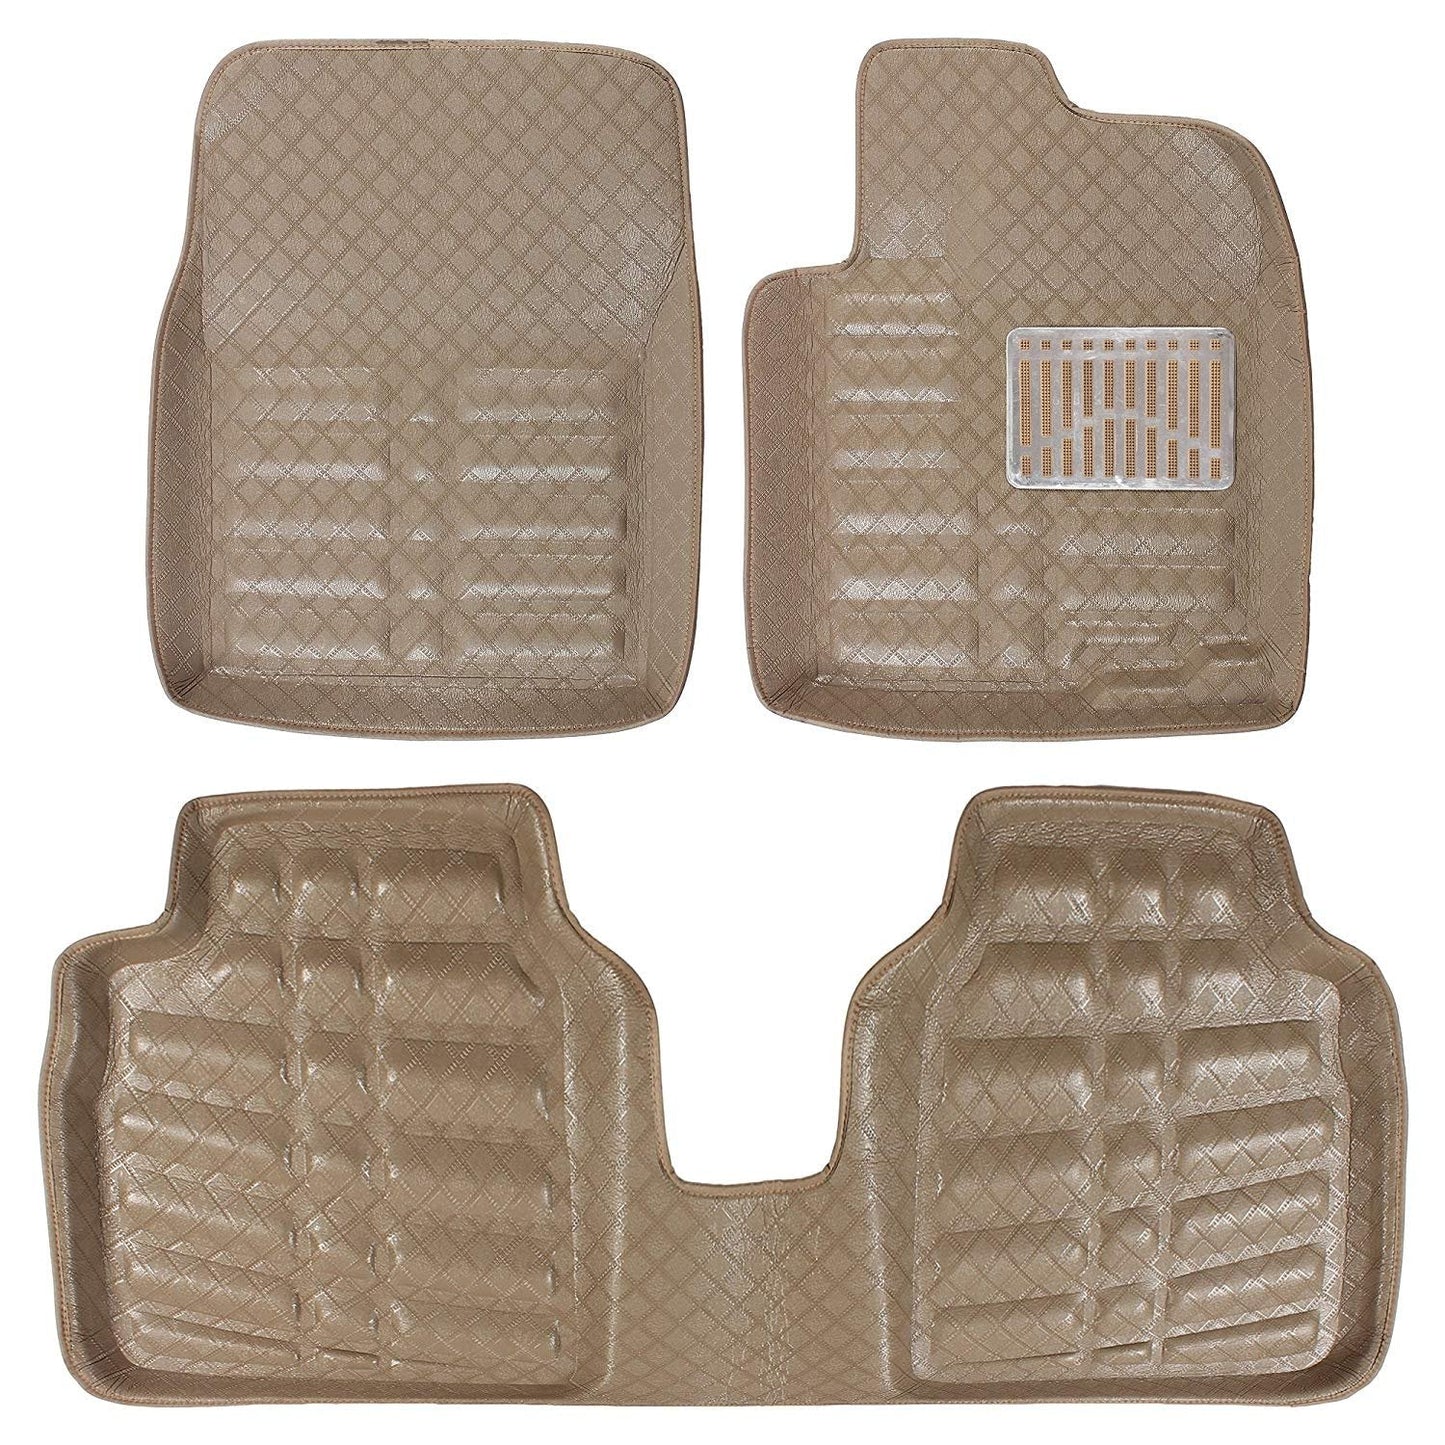 Oshotto 4D Artificial Leather Car Floor Mats For KIA Carens - Set of 5 (Complete Mat with 3rd Row and Dicky) - Beige